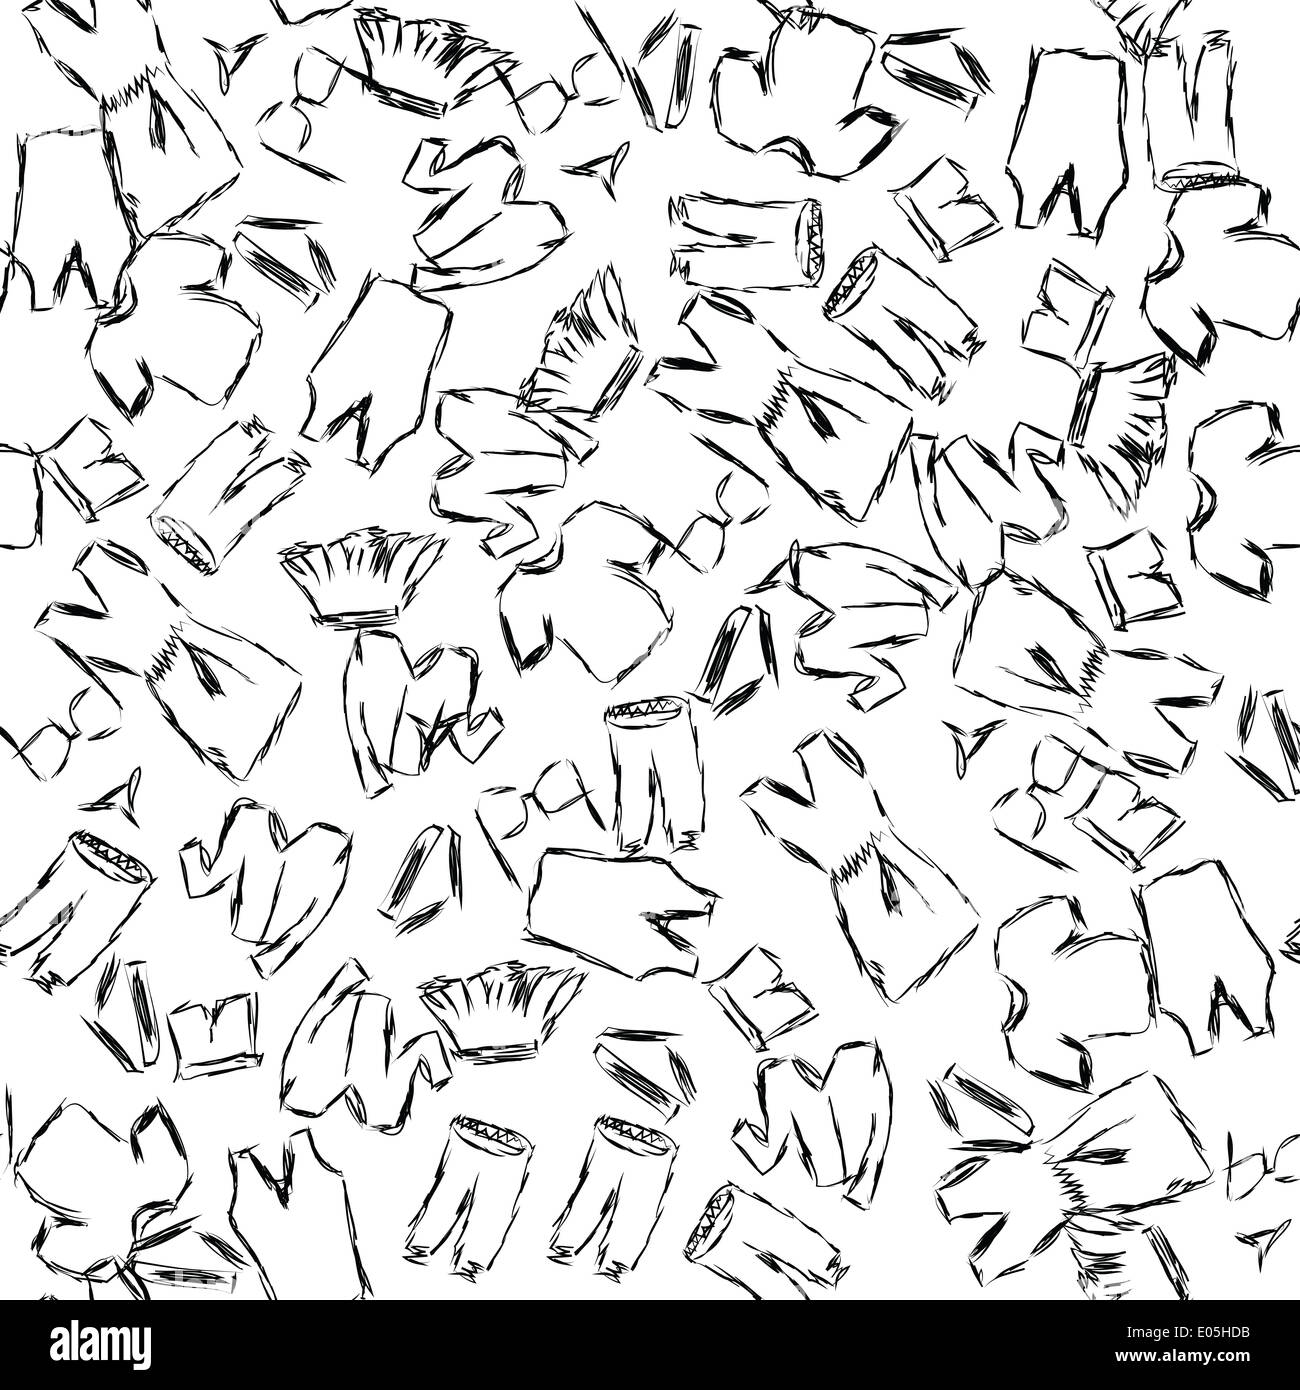 Vector illustration of cloths' sketch seamless pattern. Stock Photo